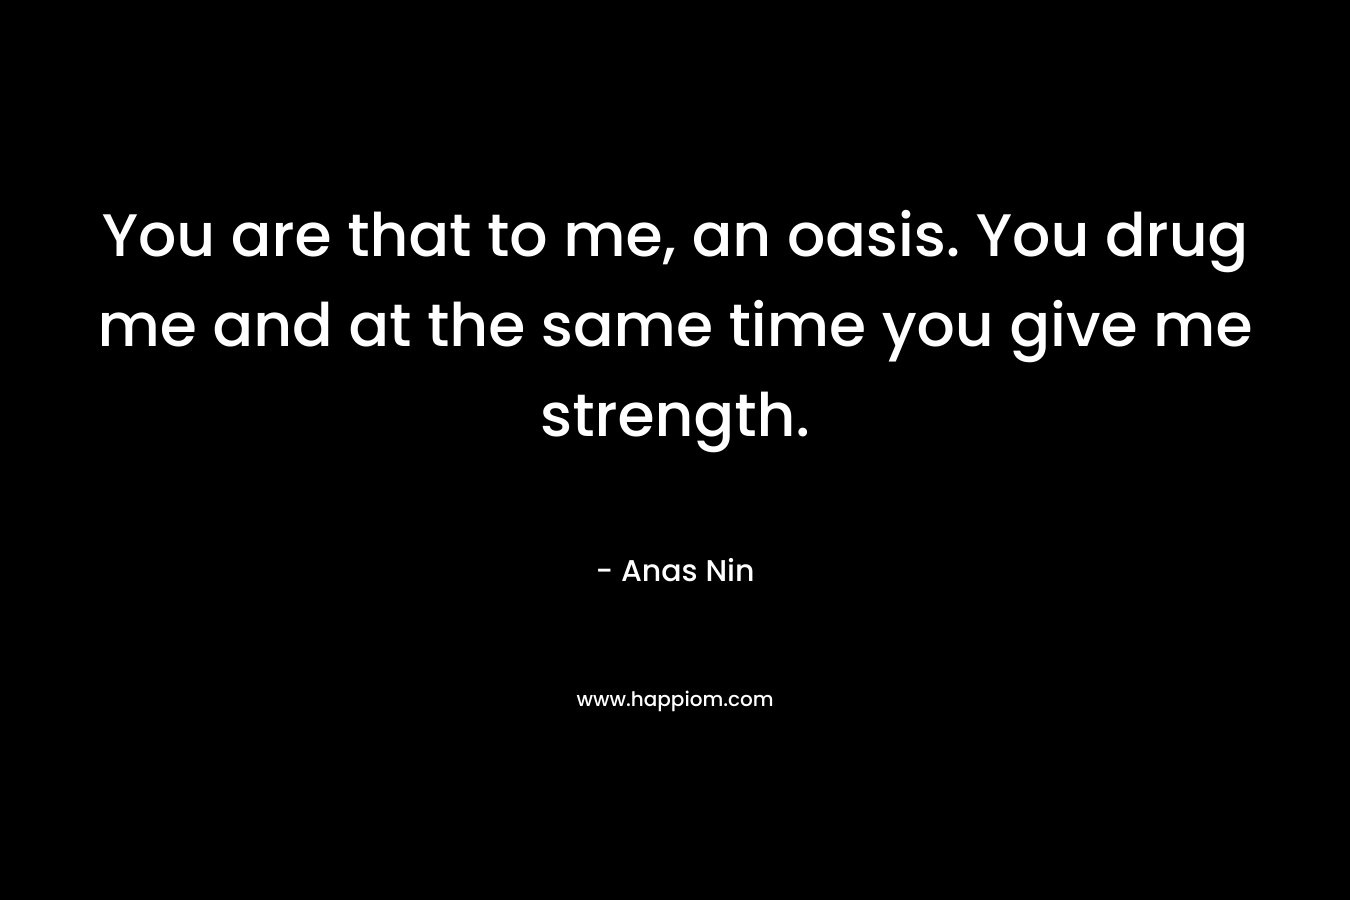 You are that to me, an oasis. You drug me and at the same time you give me strength.